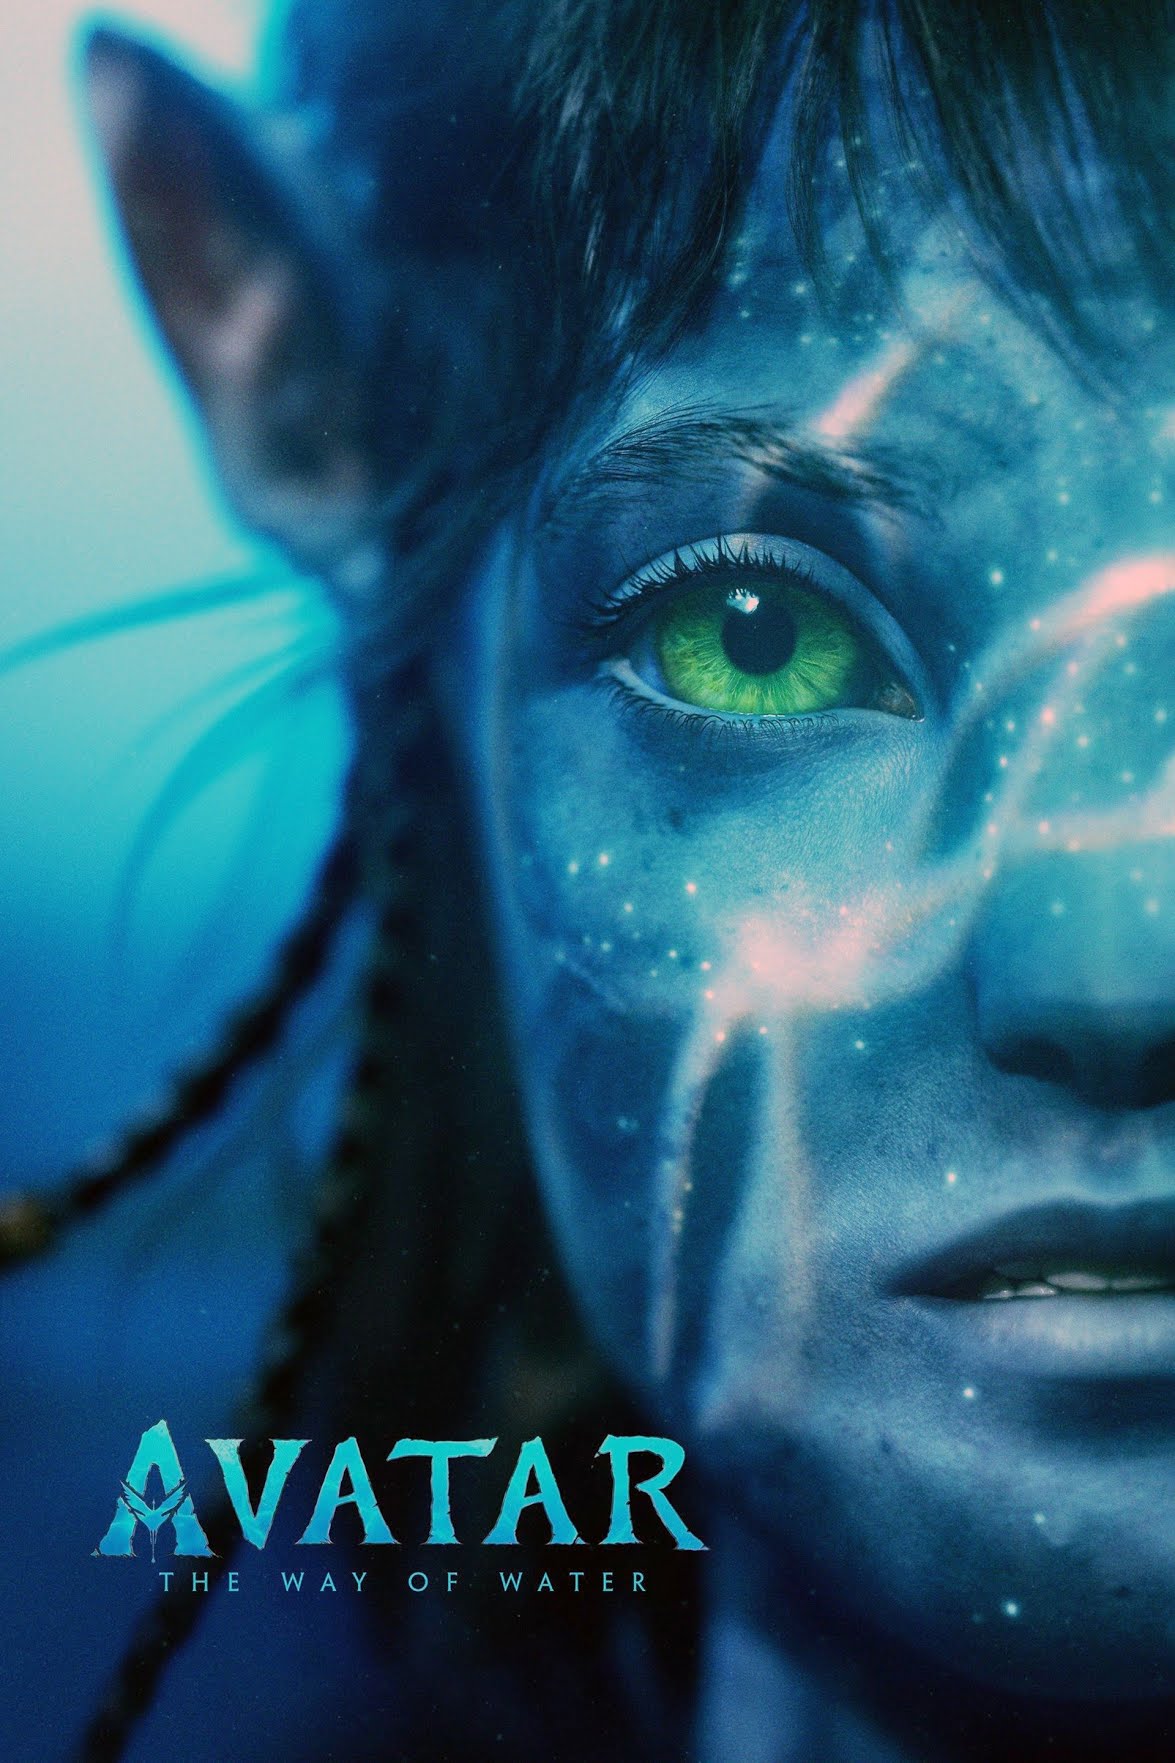 Avatar Way of the Water Movie Poster